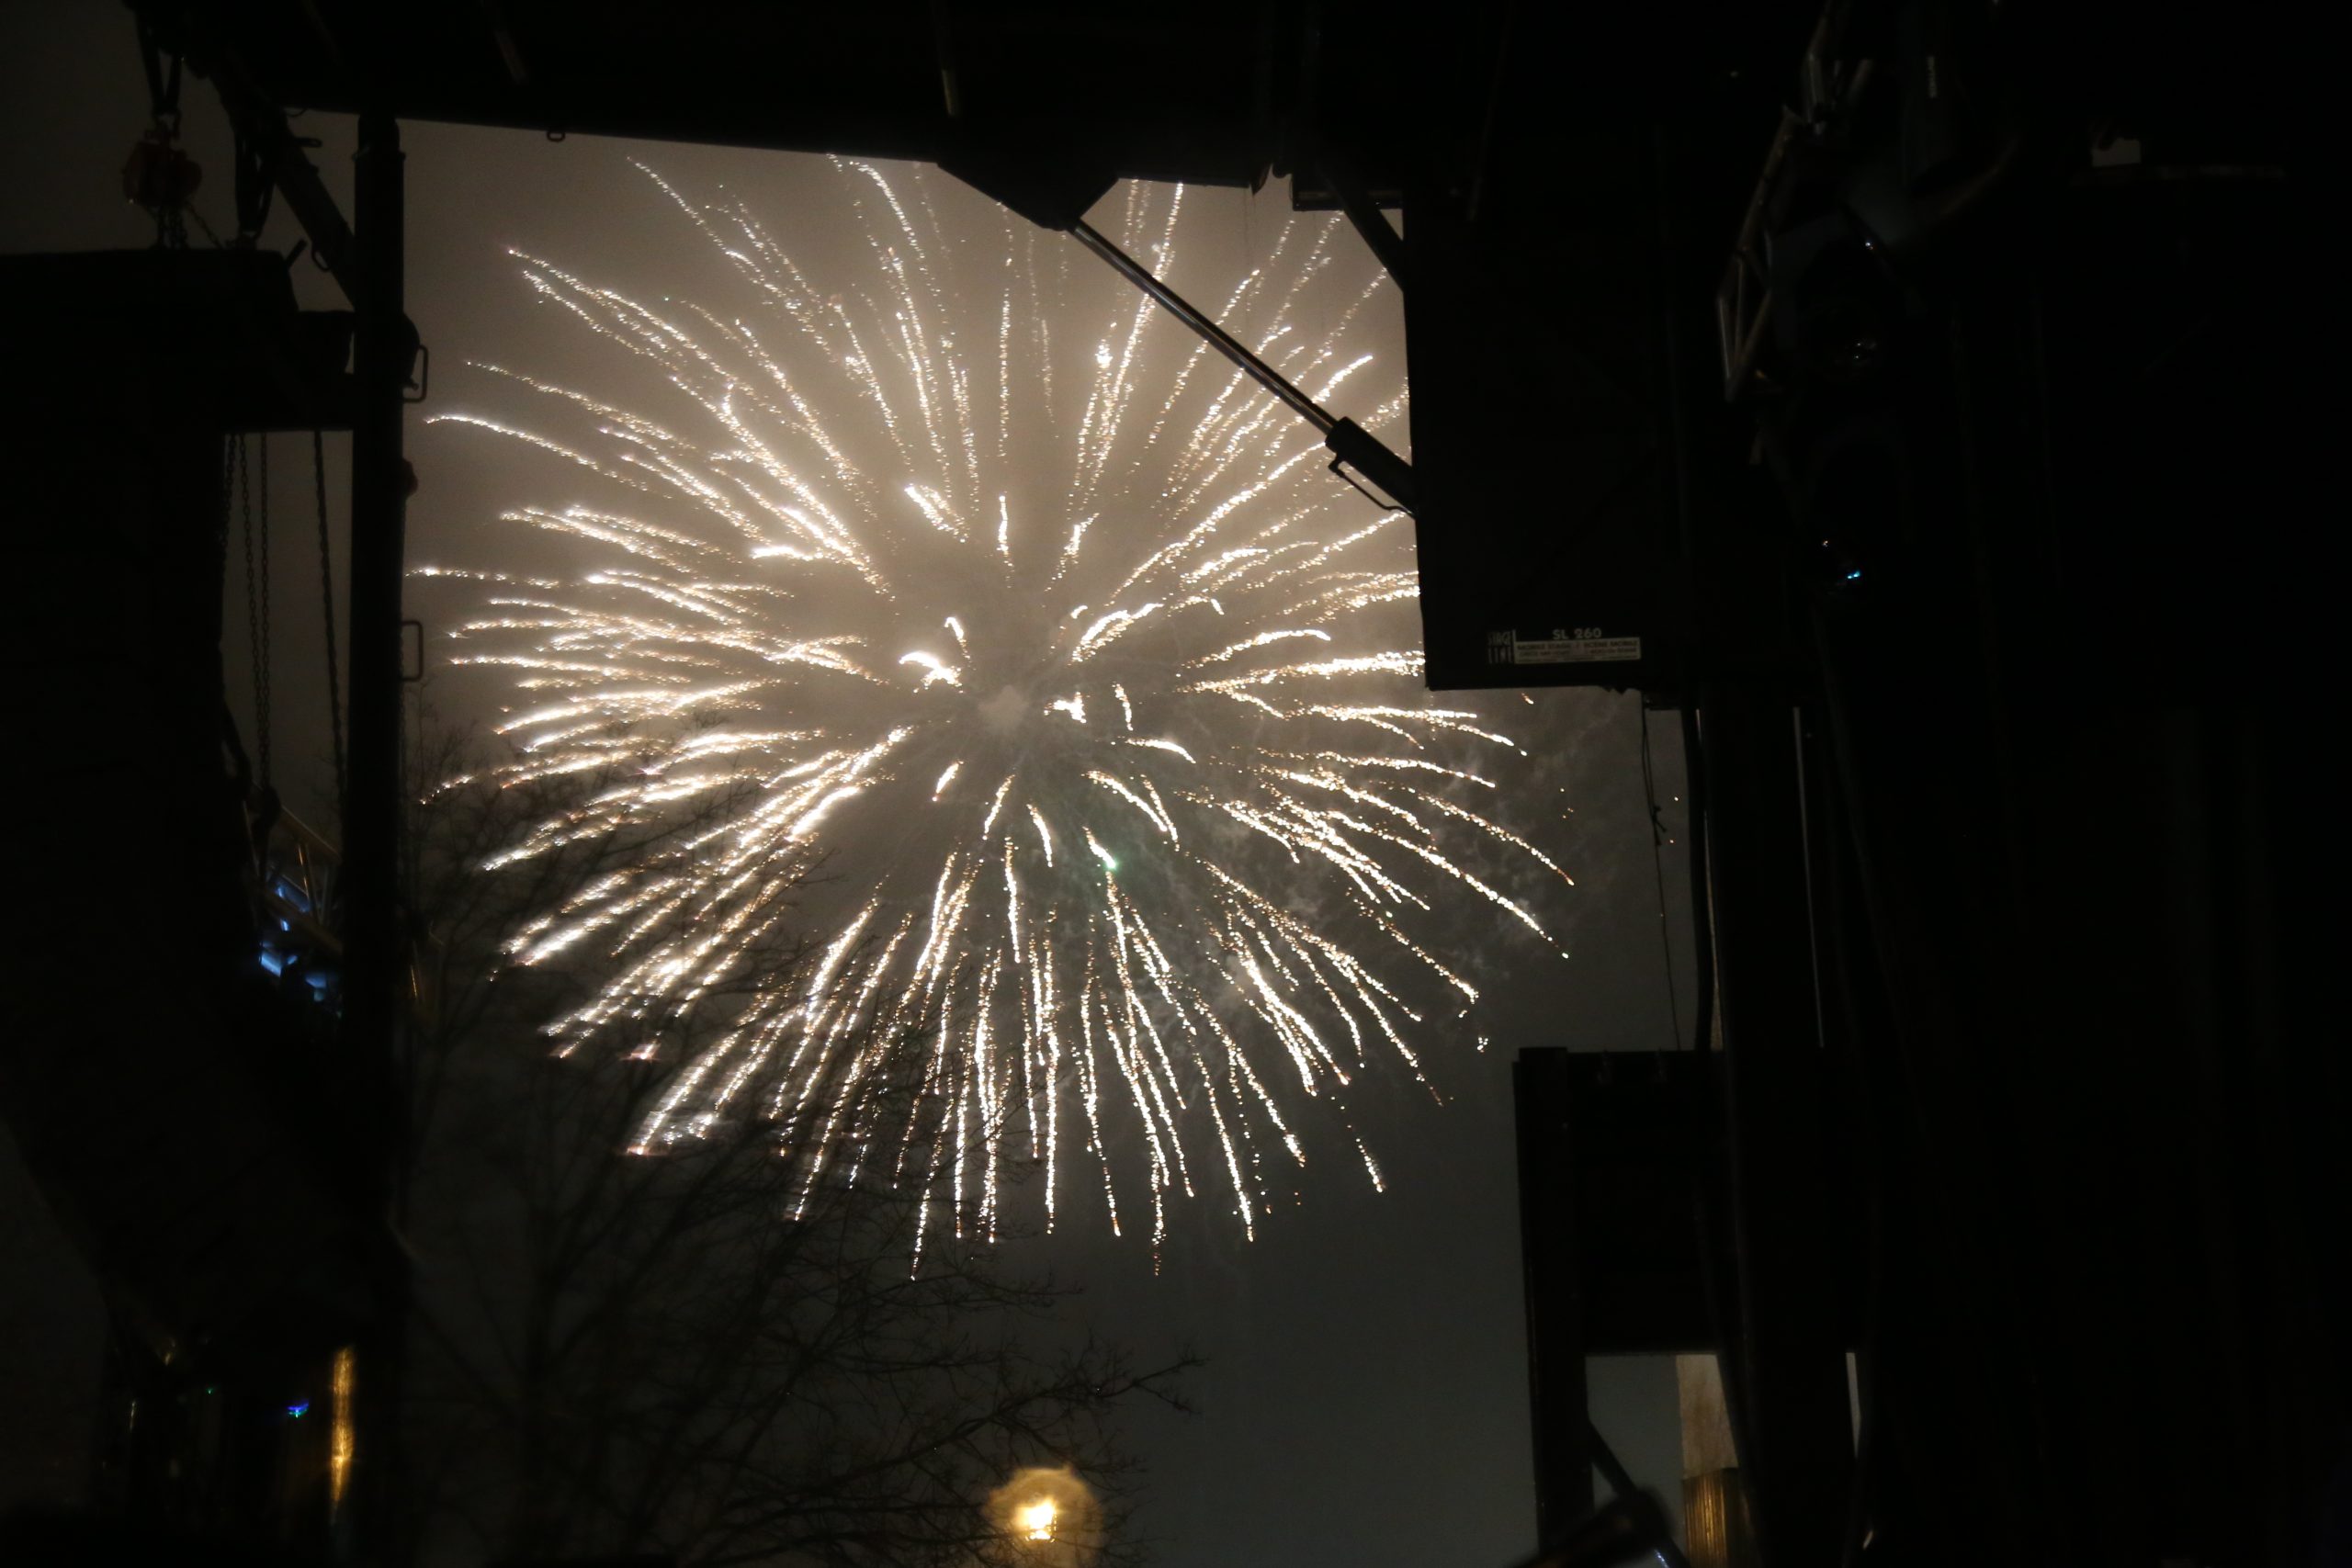 Fireworks lit up the sky at midnight at Barrie's Downtown Countdown